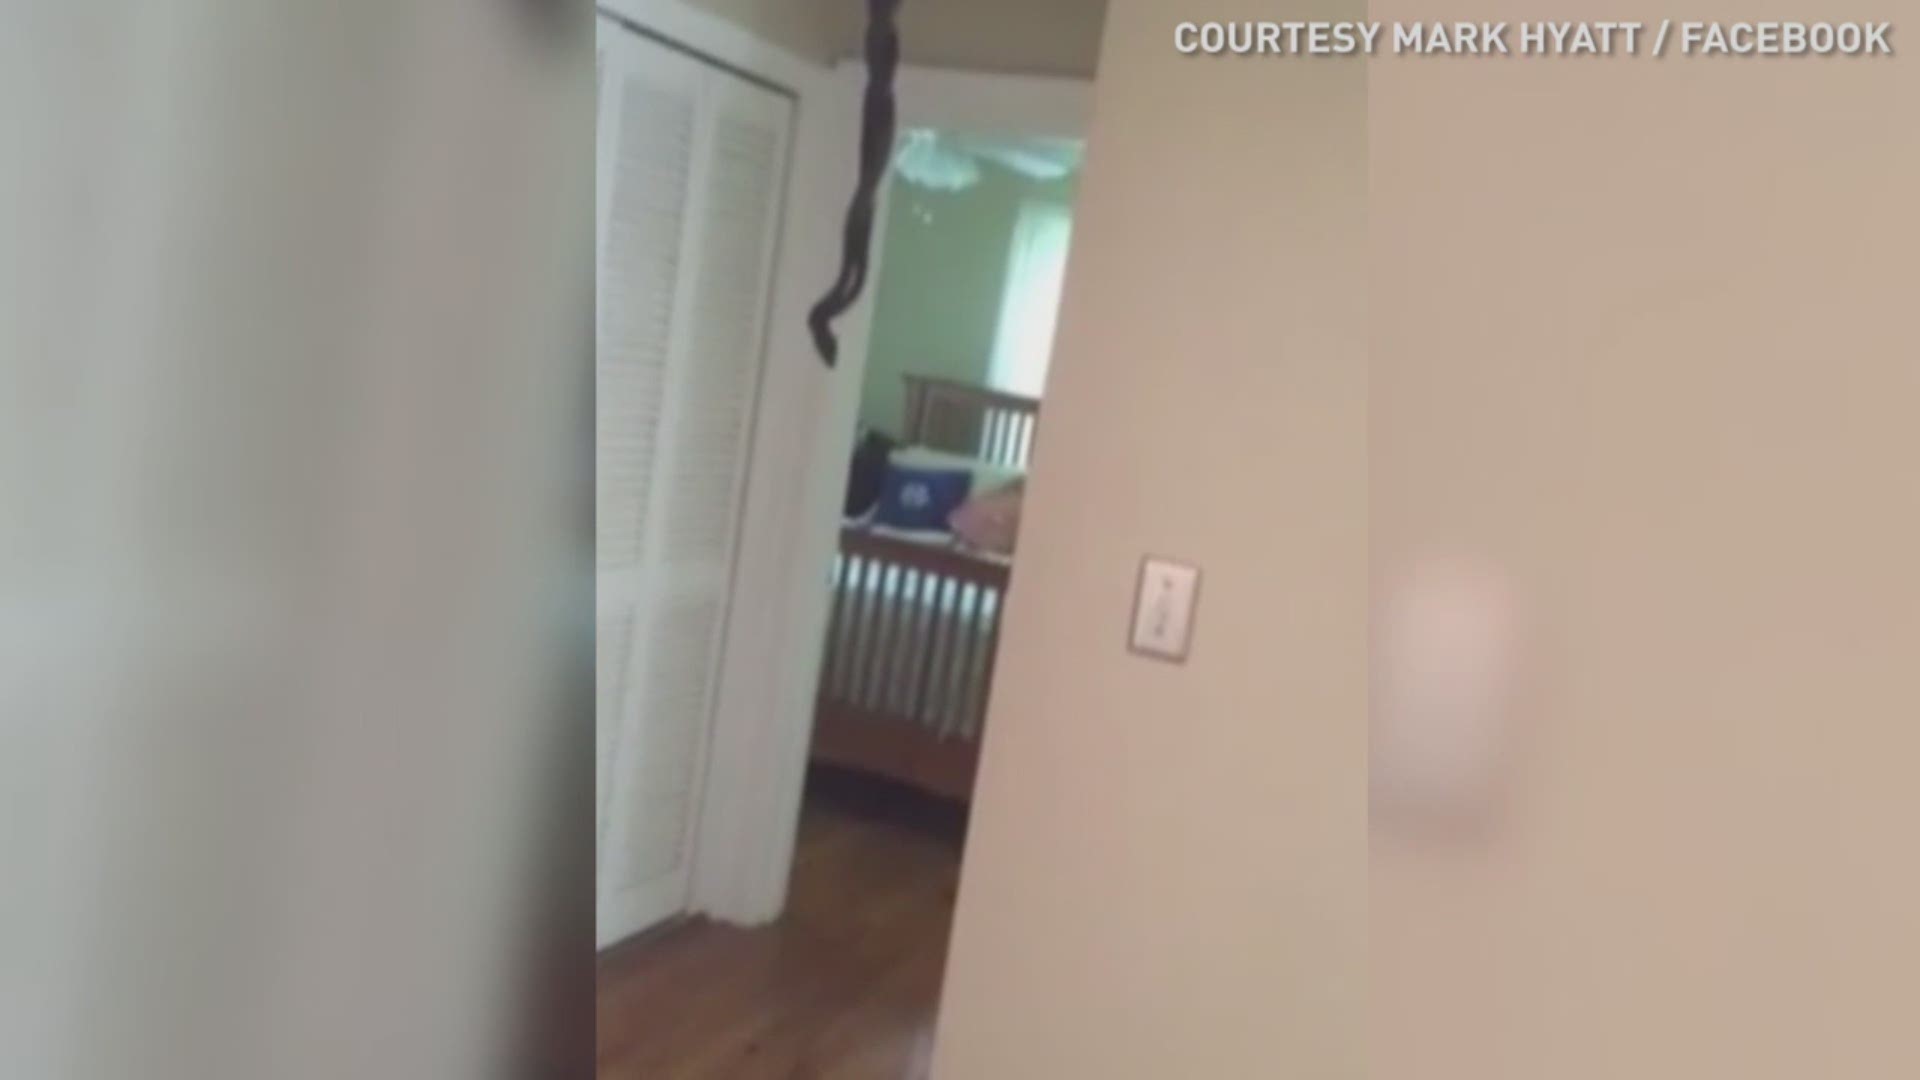 A South Carolina man finds mating snakes dangling from his attic